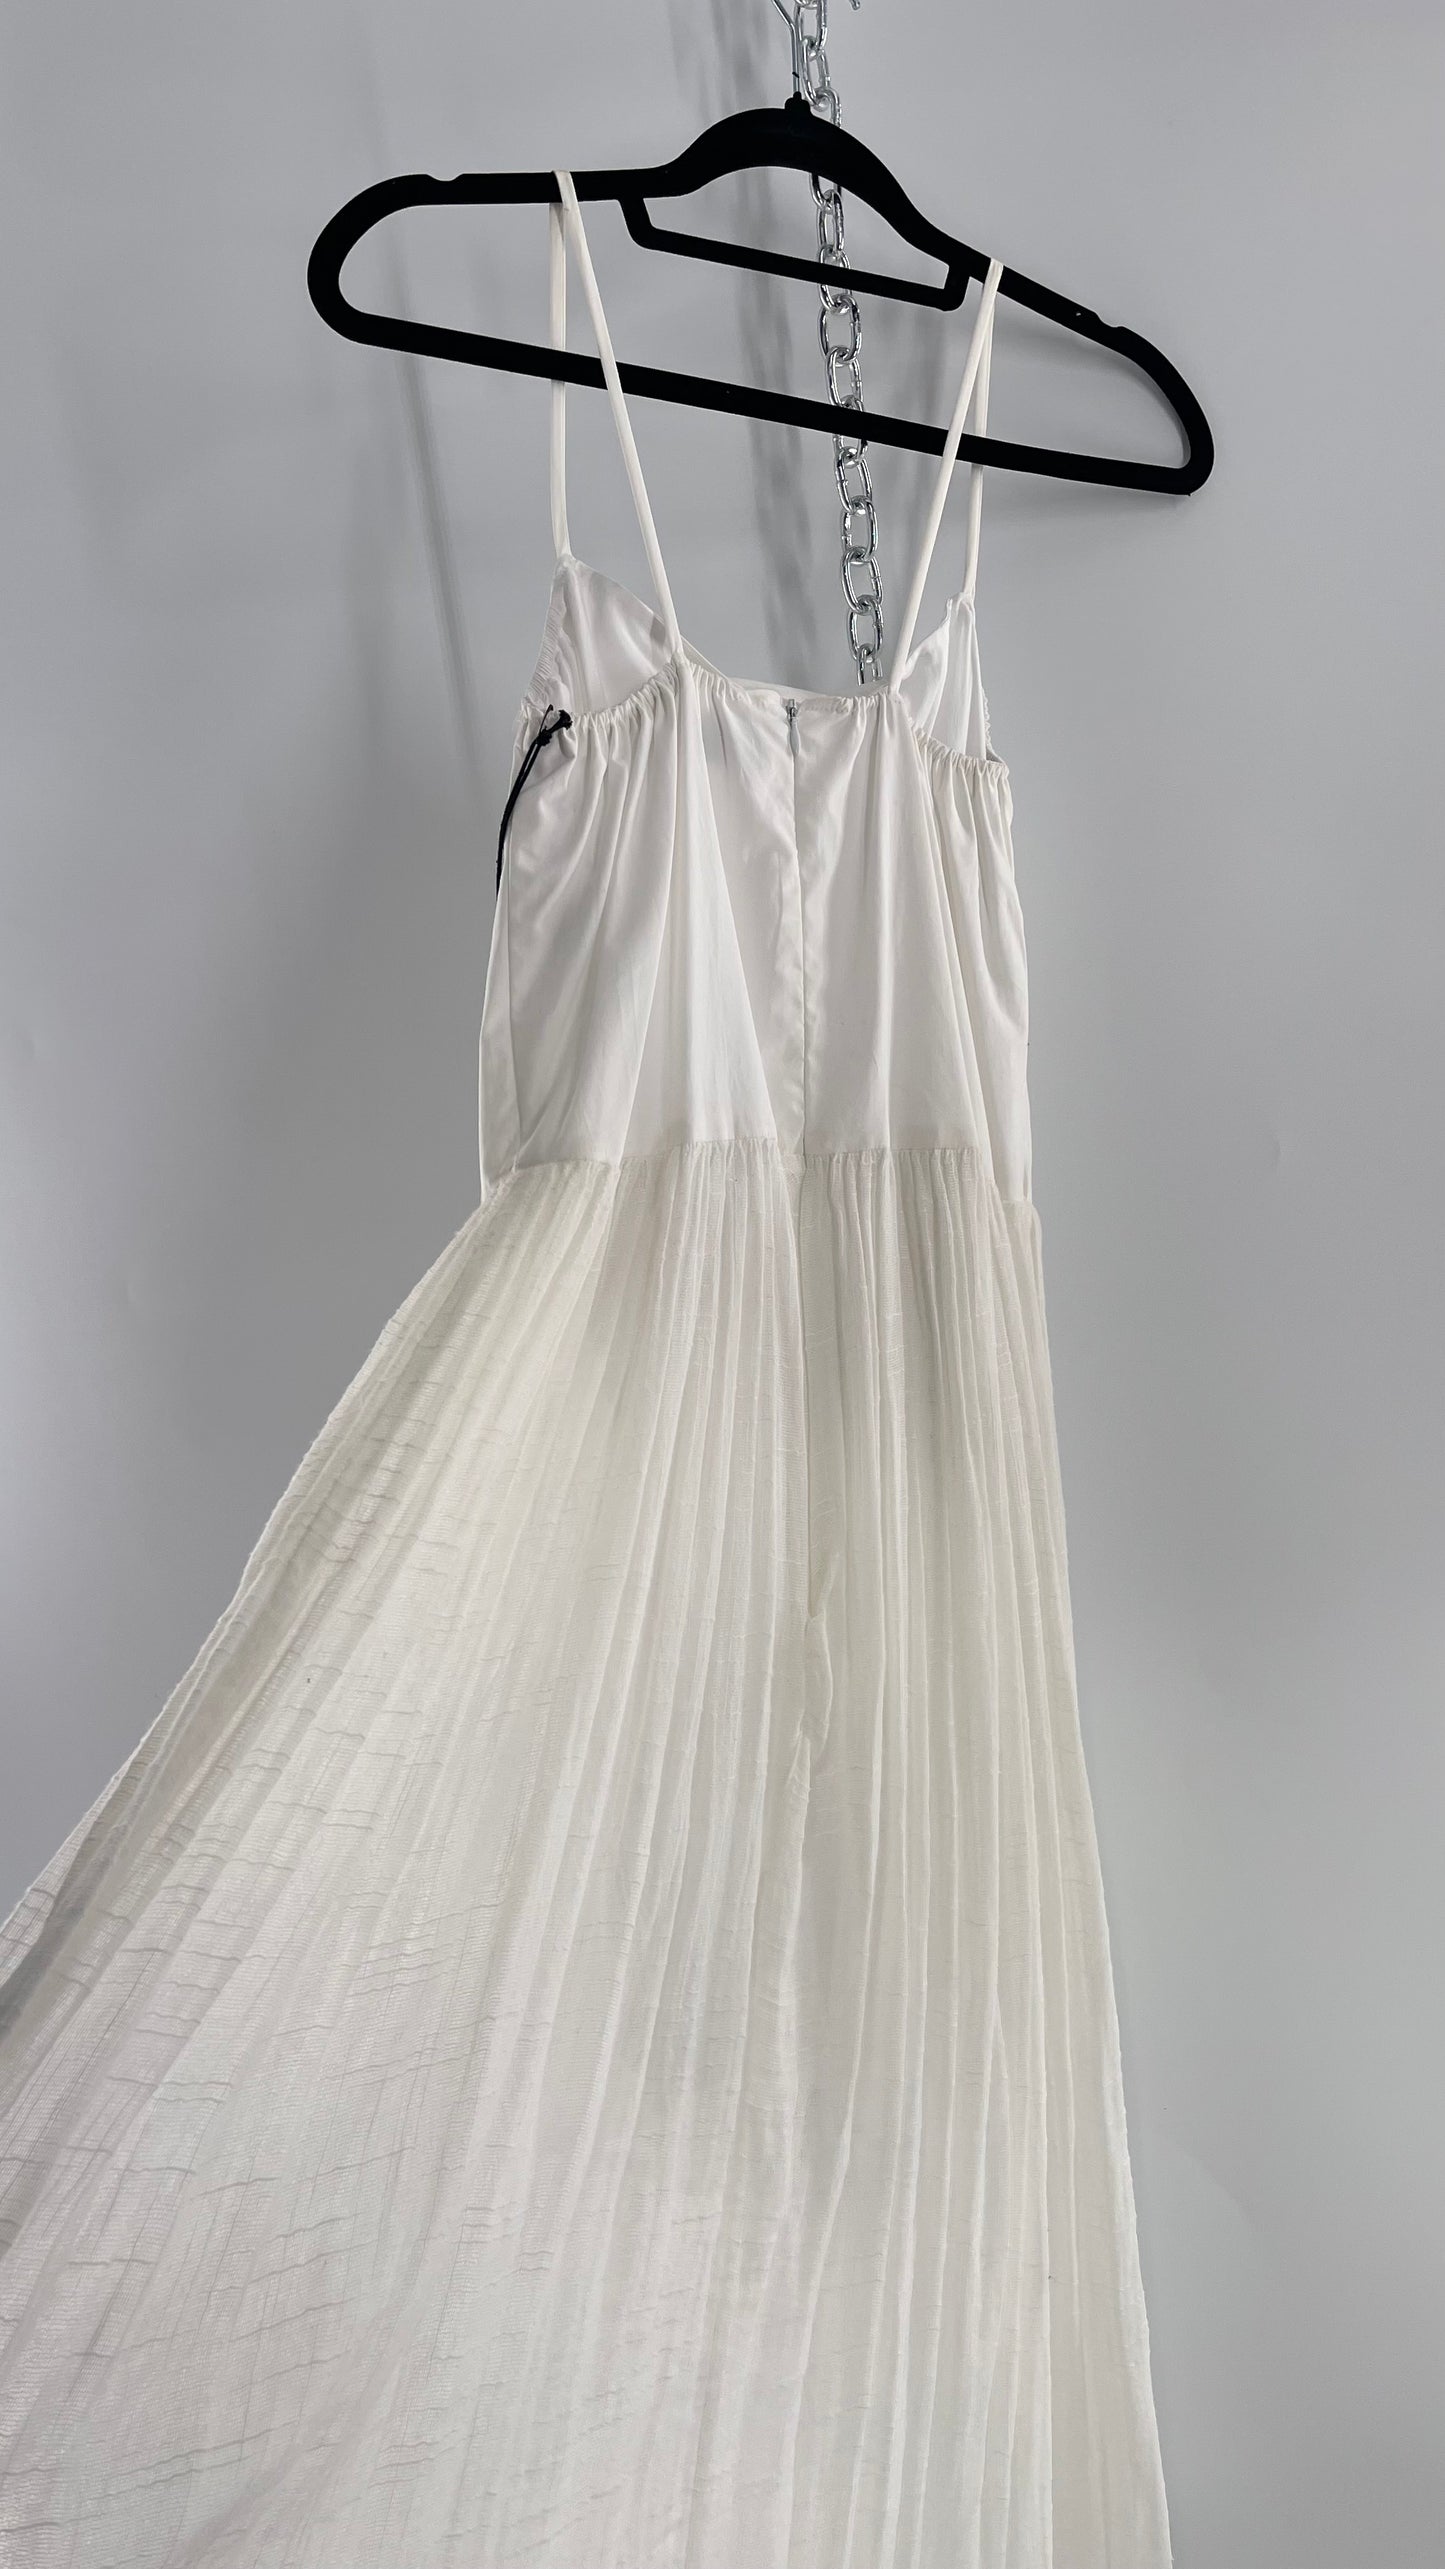 ØM Objects Without Meaning White Dress with Woven Skirt and Tags Attached (Large)